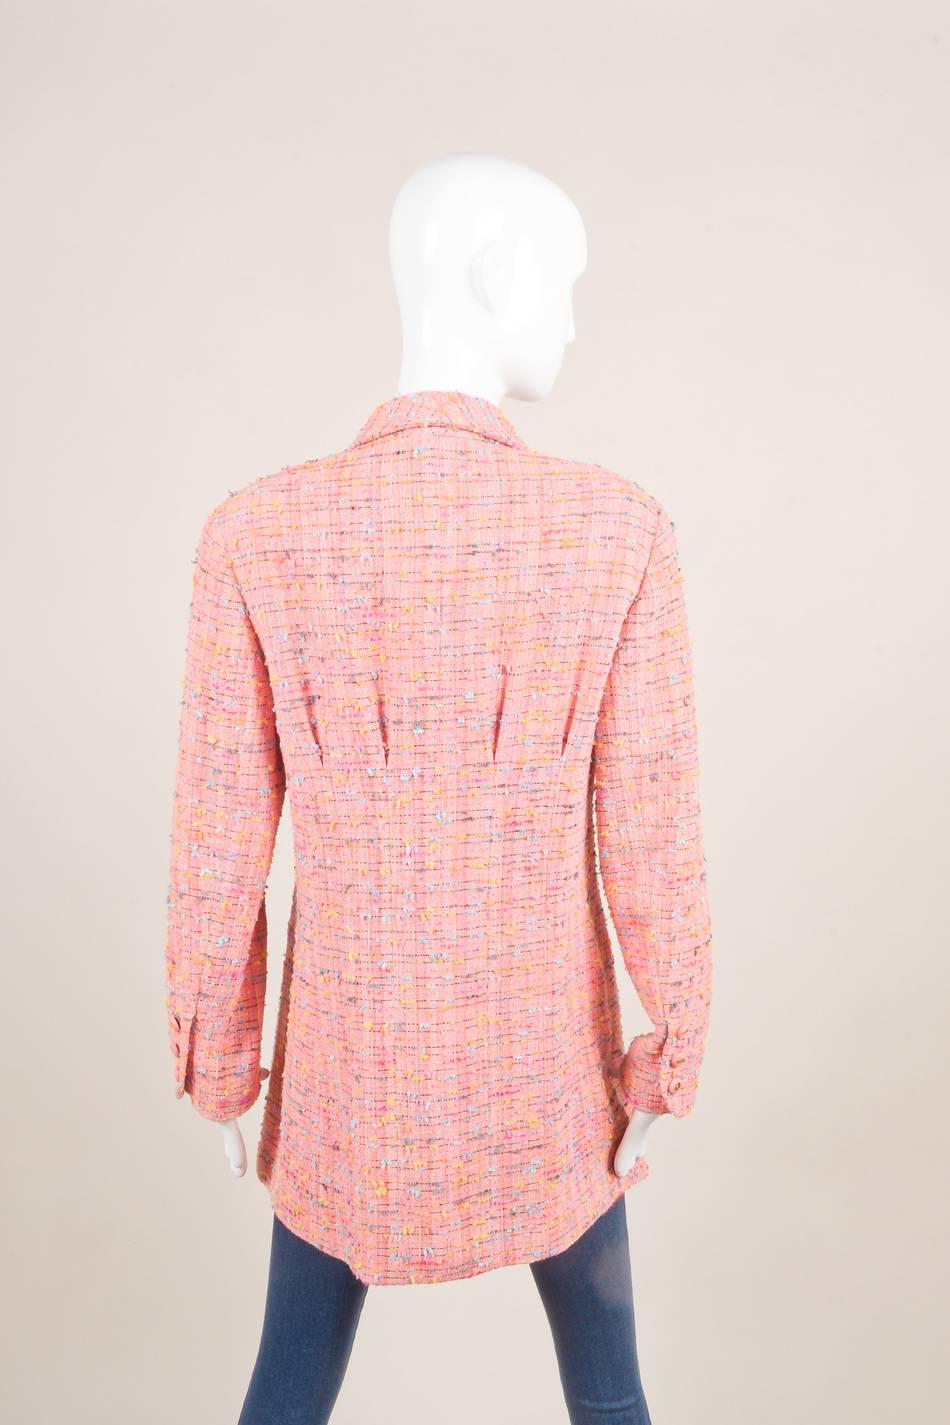 This lovely longline, fitted jacket is constructed of bright pink and multicolor, nubby confetti tweed material. Narrow shawl collar. Small, subtle pleats at chest and upper back Long sleeves. Front button fastening. Patch chest pockets and hidden